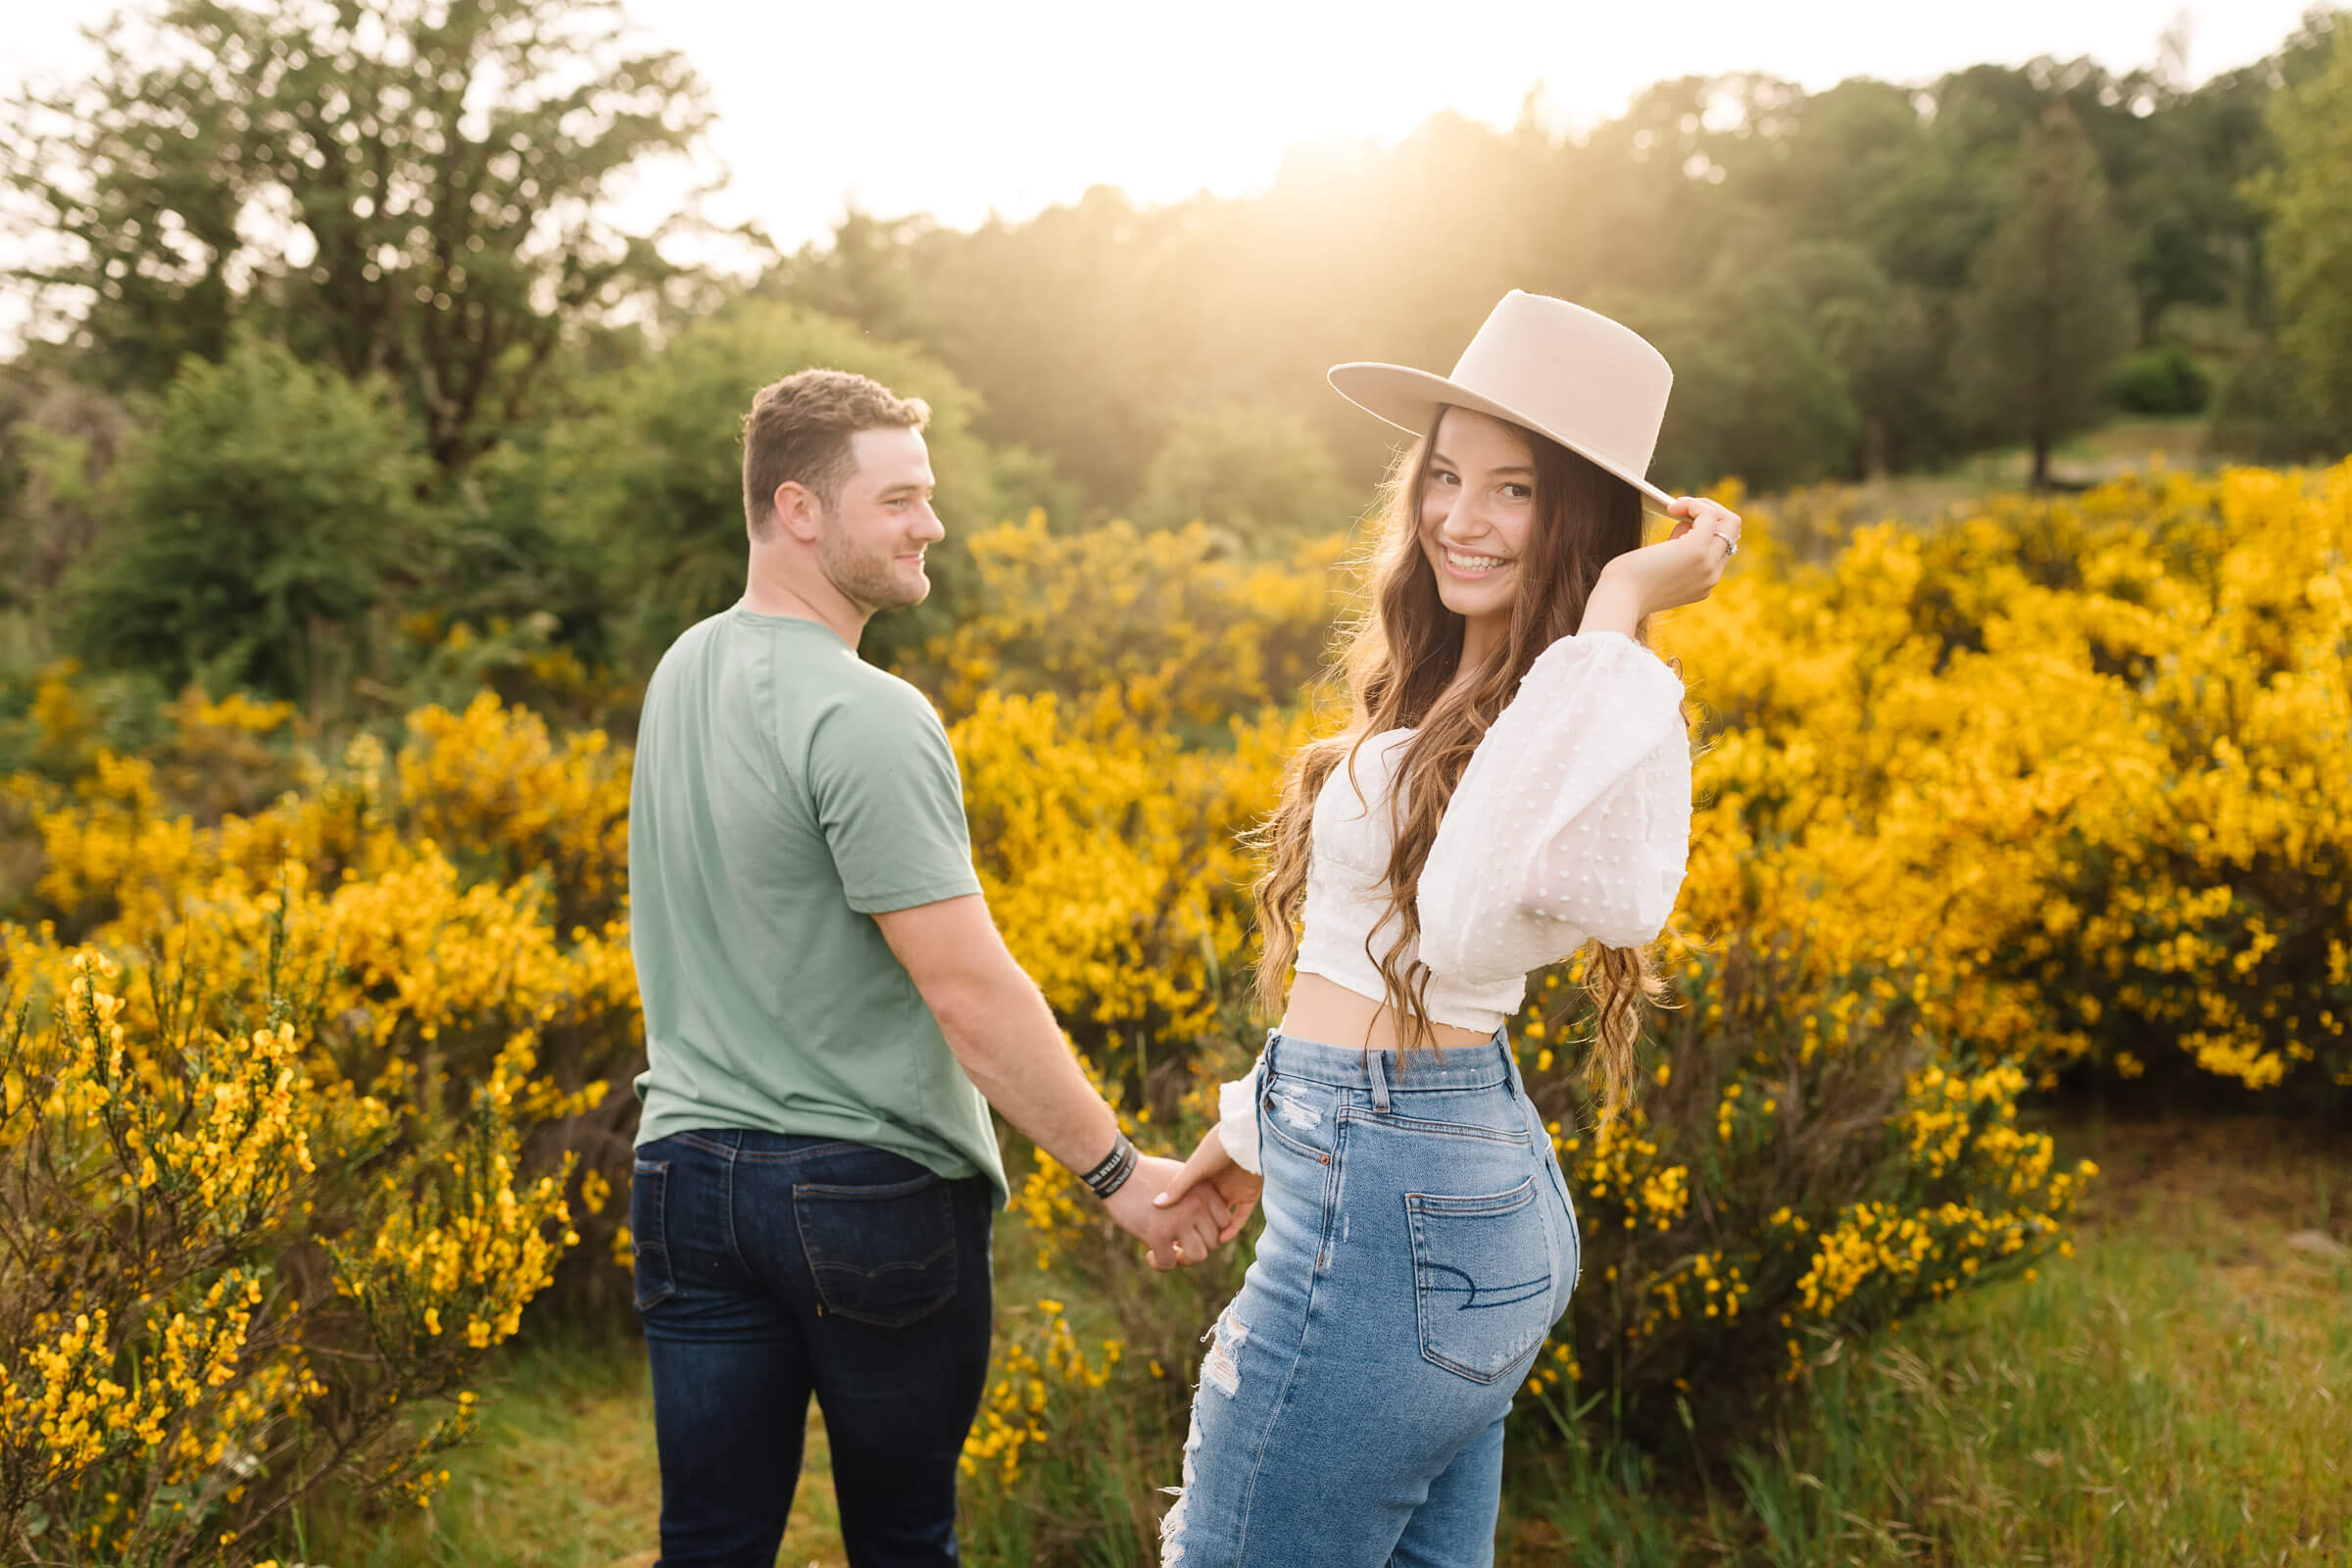 man in green shirt leading girl in white top through a field of yellow flowers during engagement photos